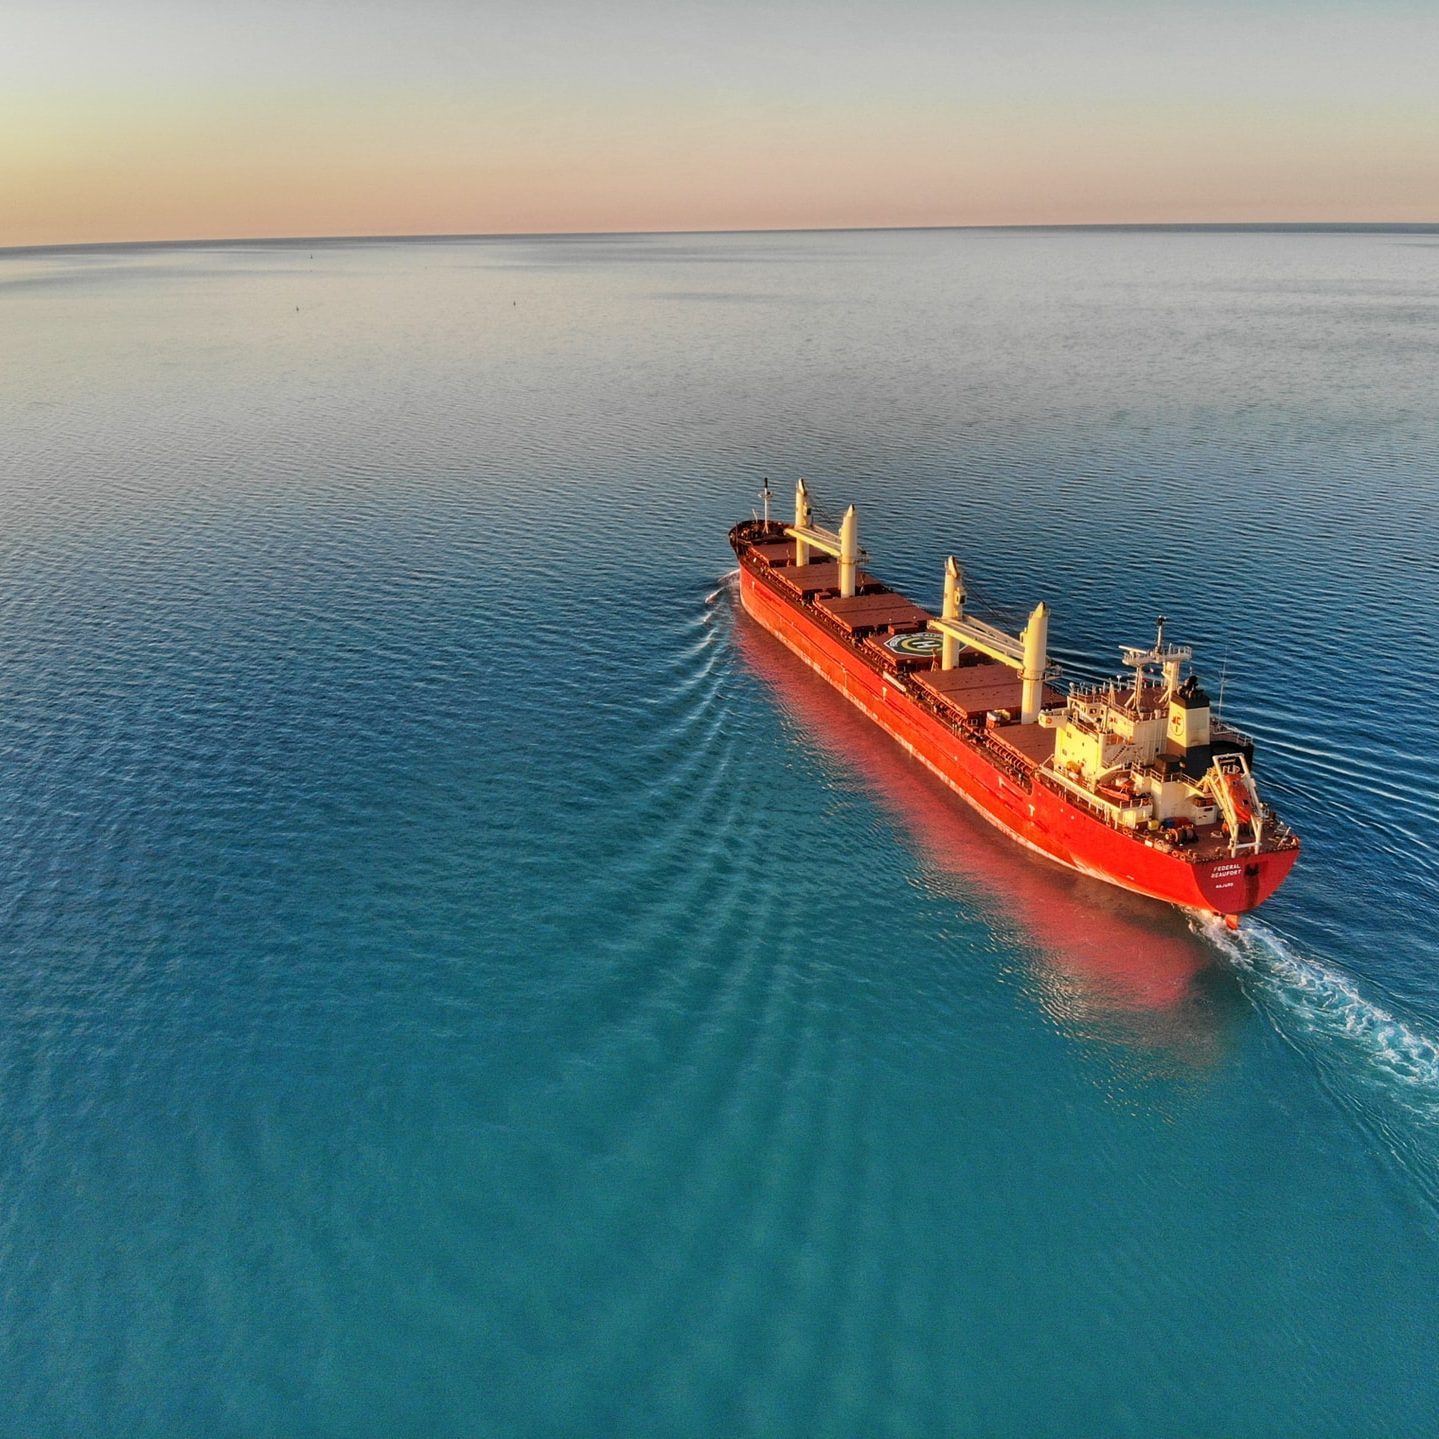 red and white cargo ship at middle of ocean